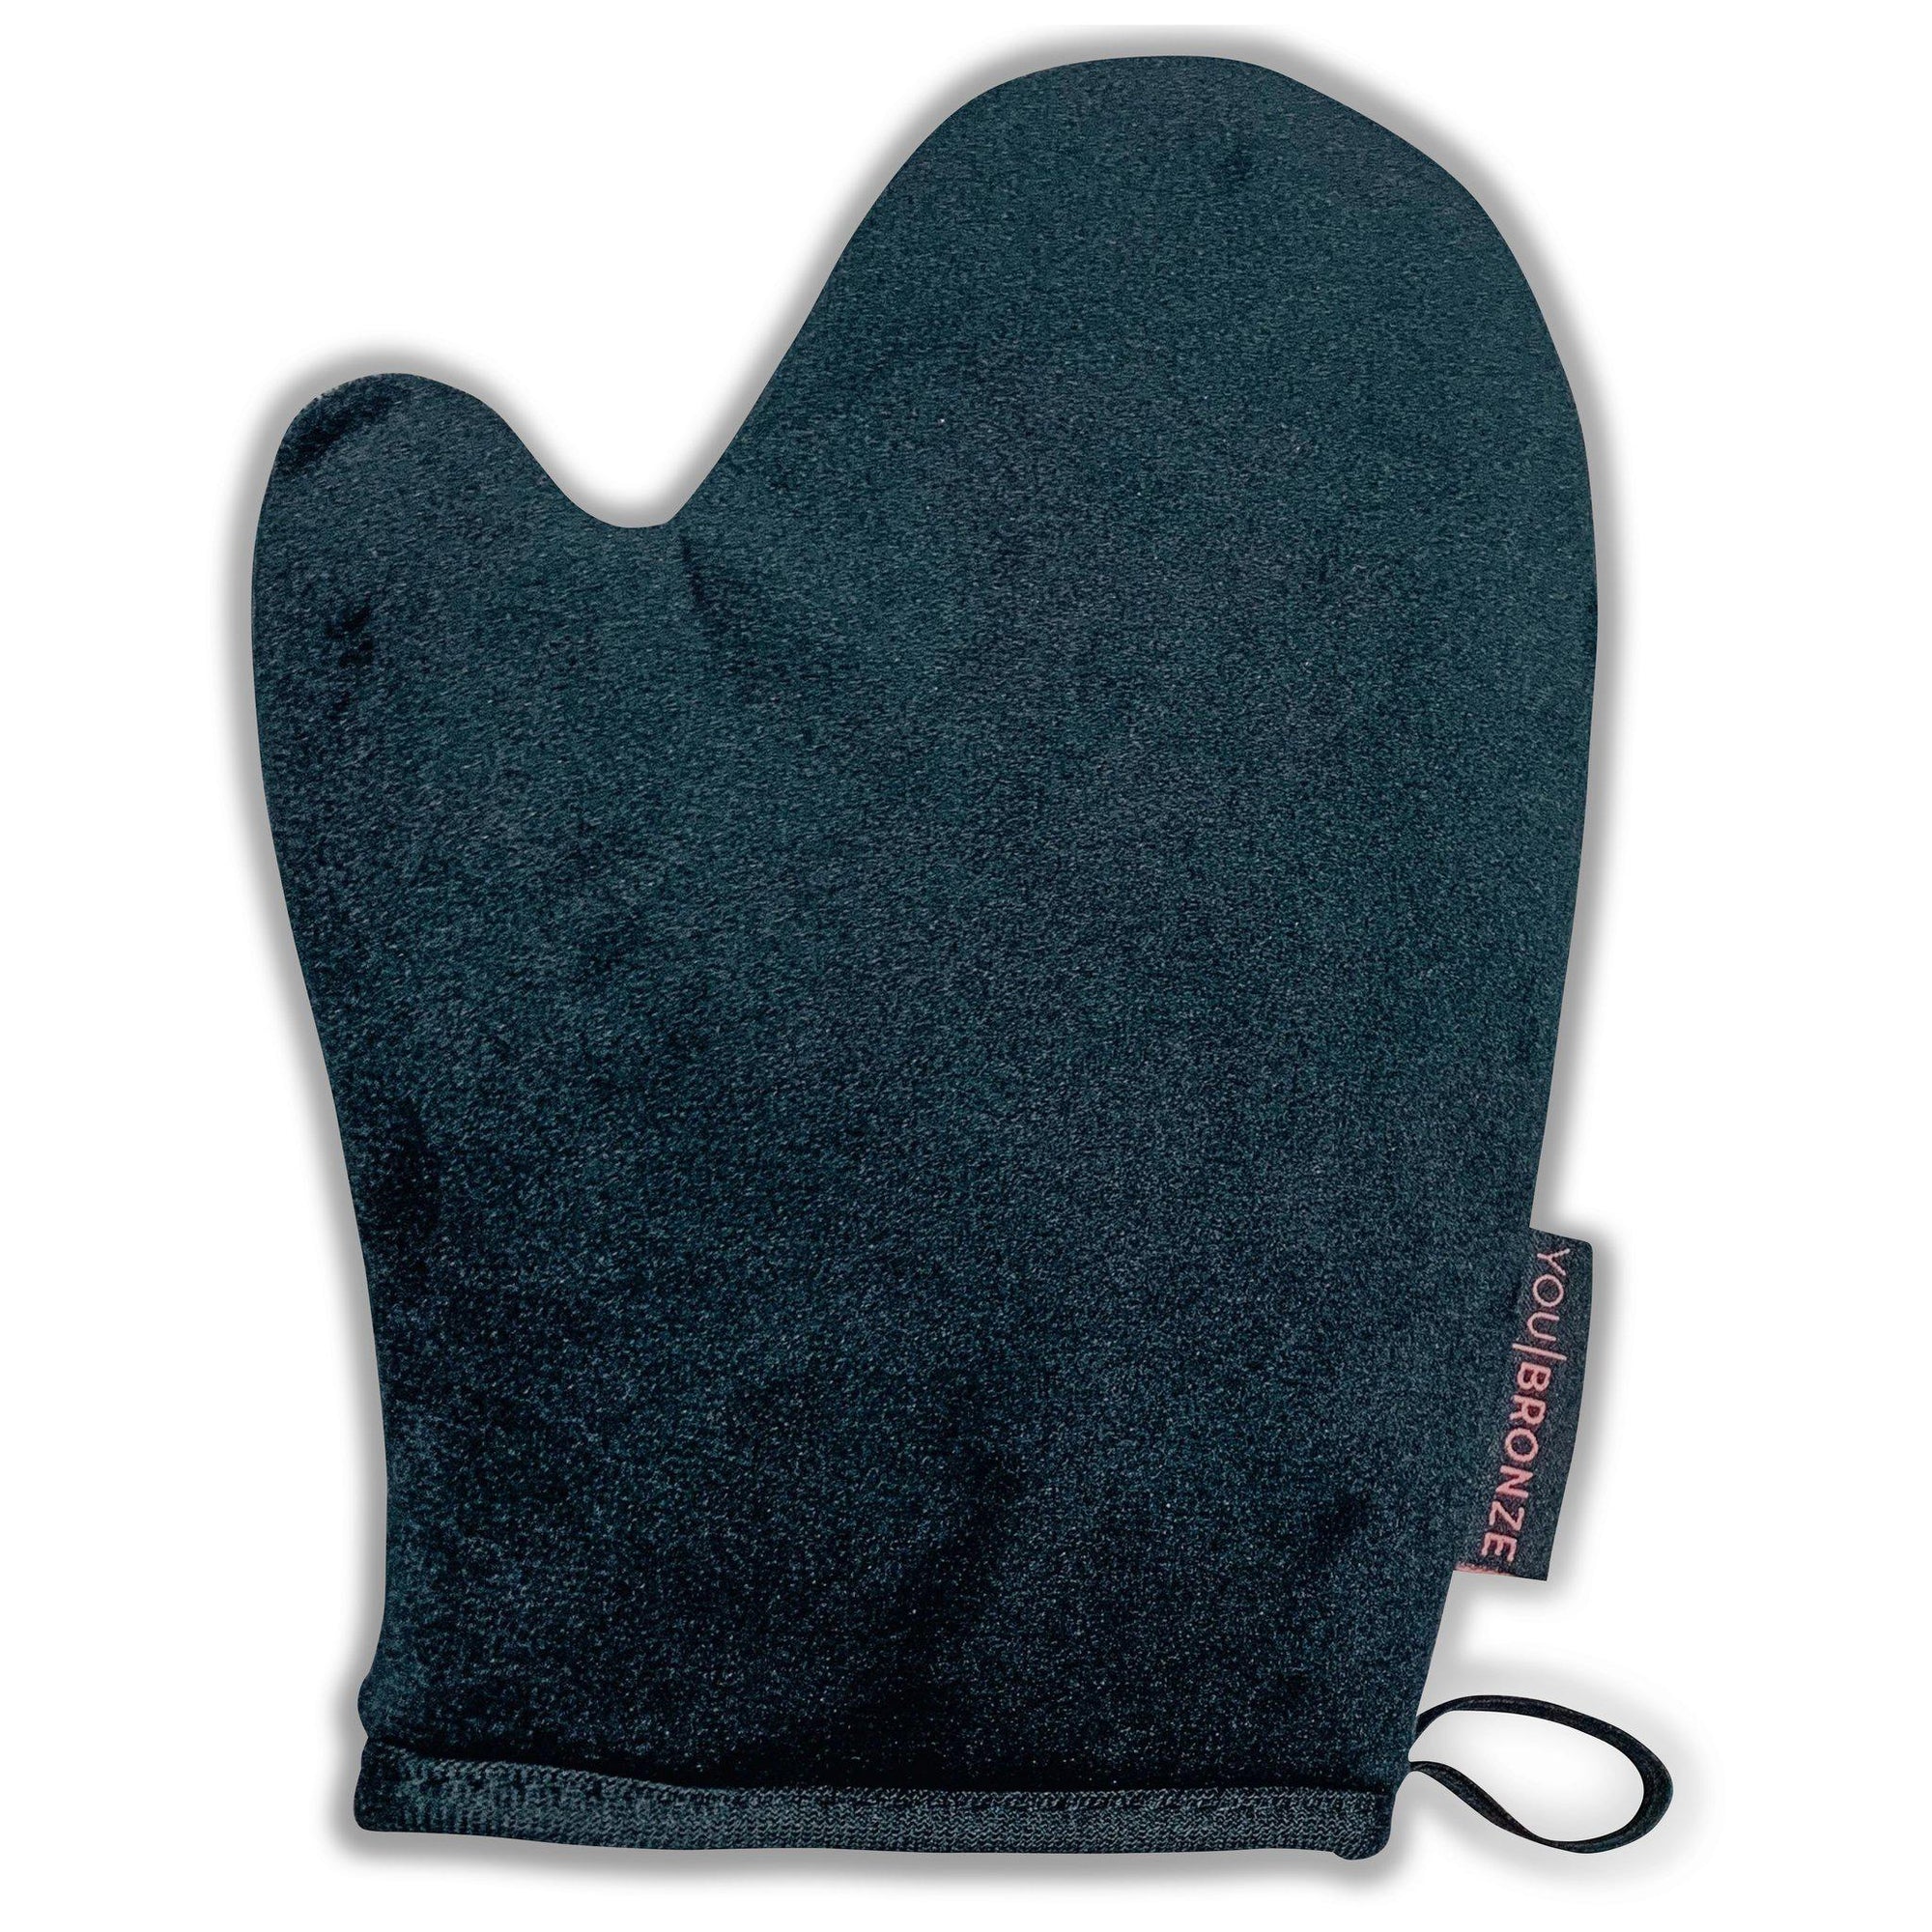 You Bronze Self Tanning Applicator Mitt - BeautyOfASite - Central Illinois Gifts, Fashion & Beauty Boutique